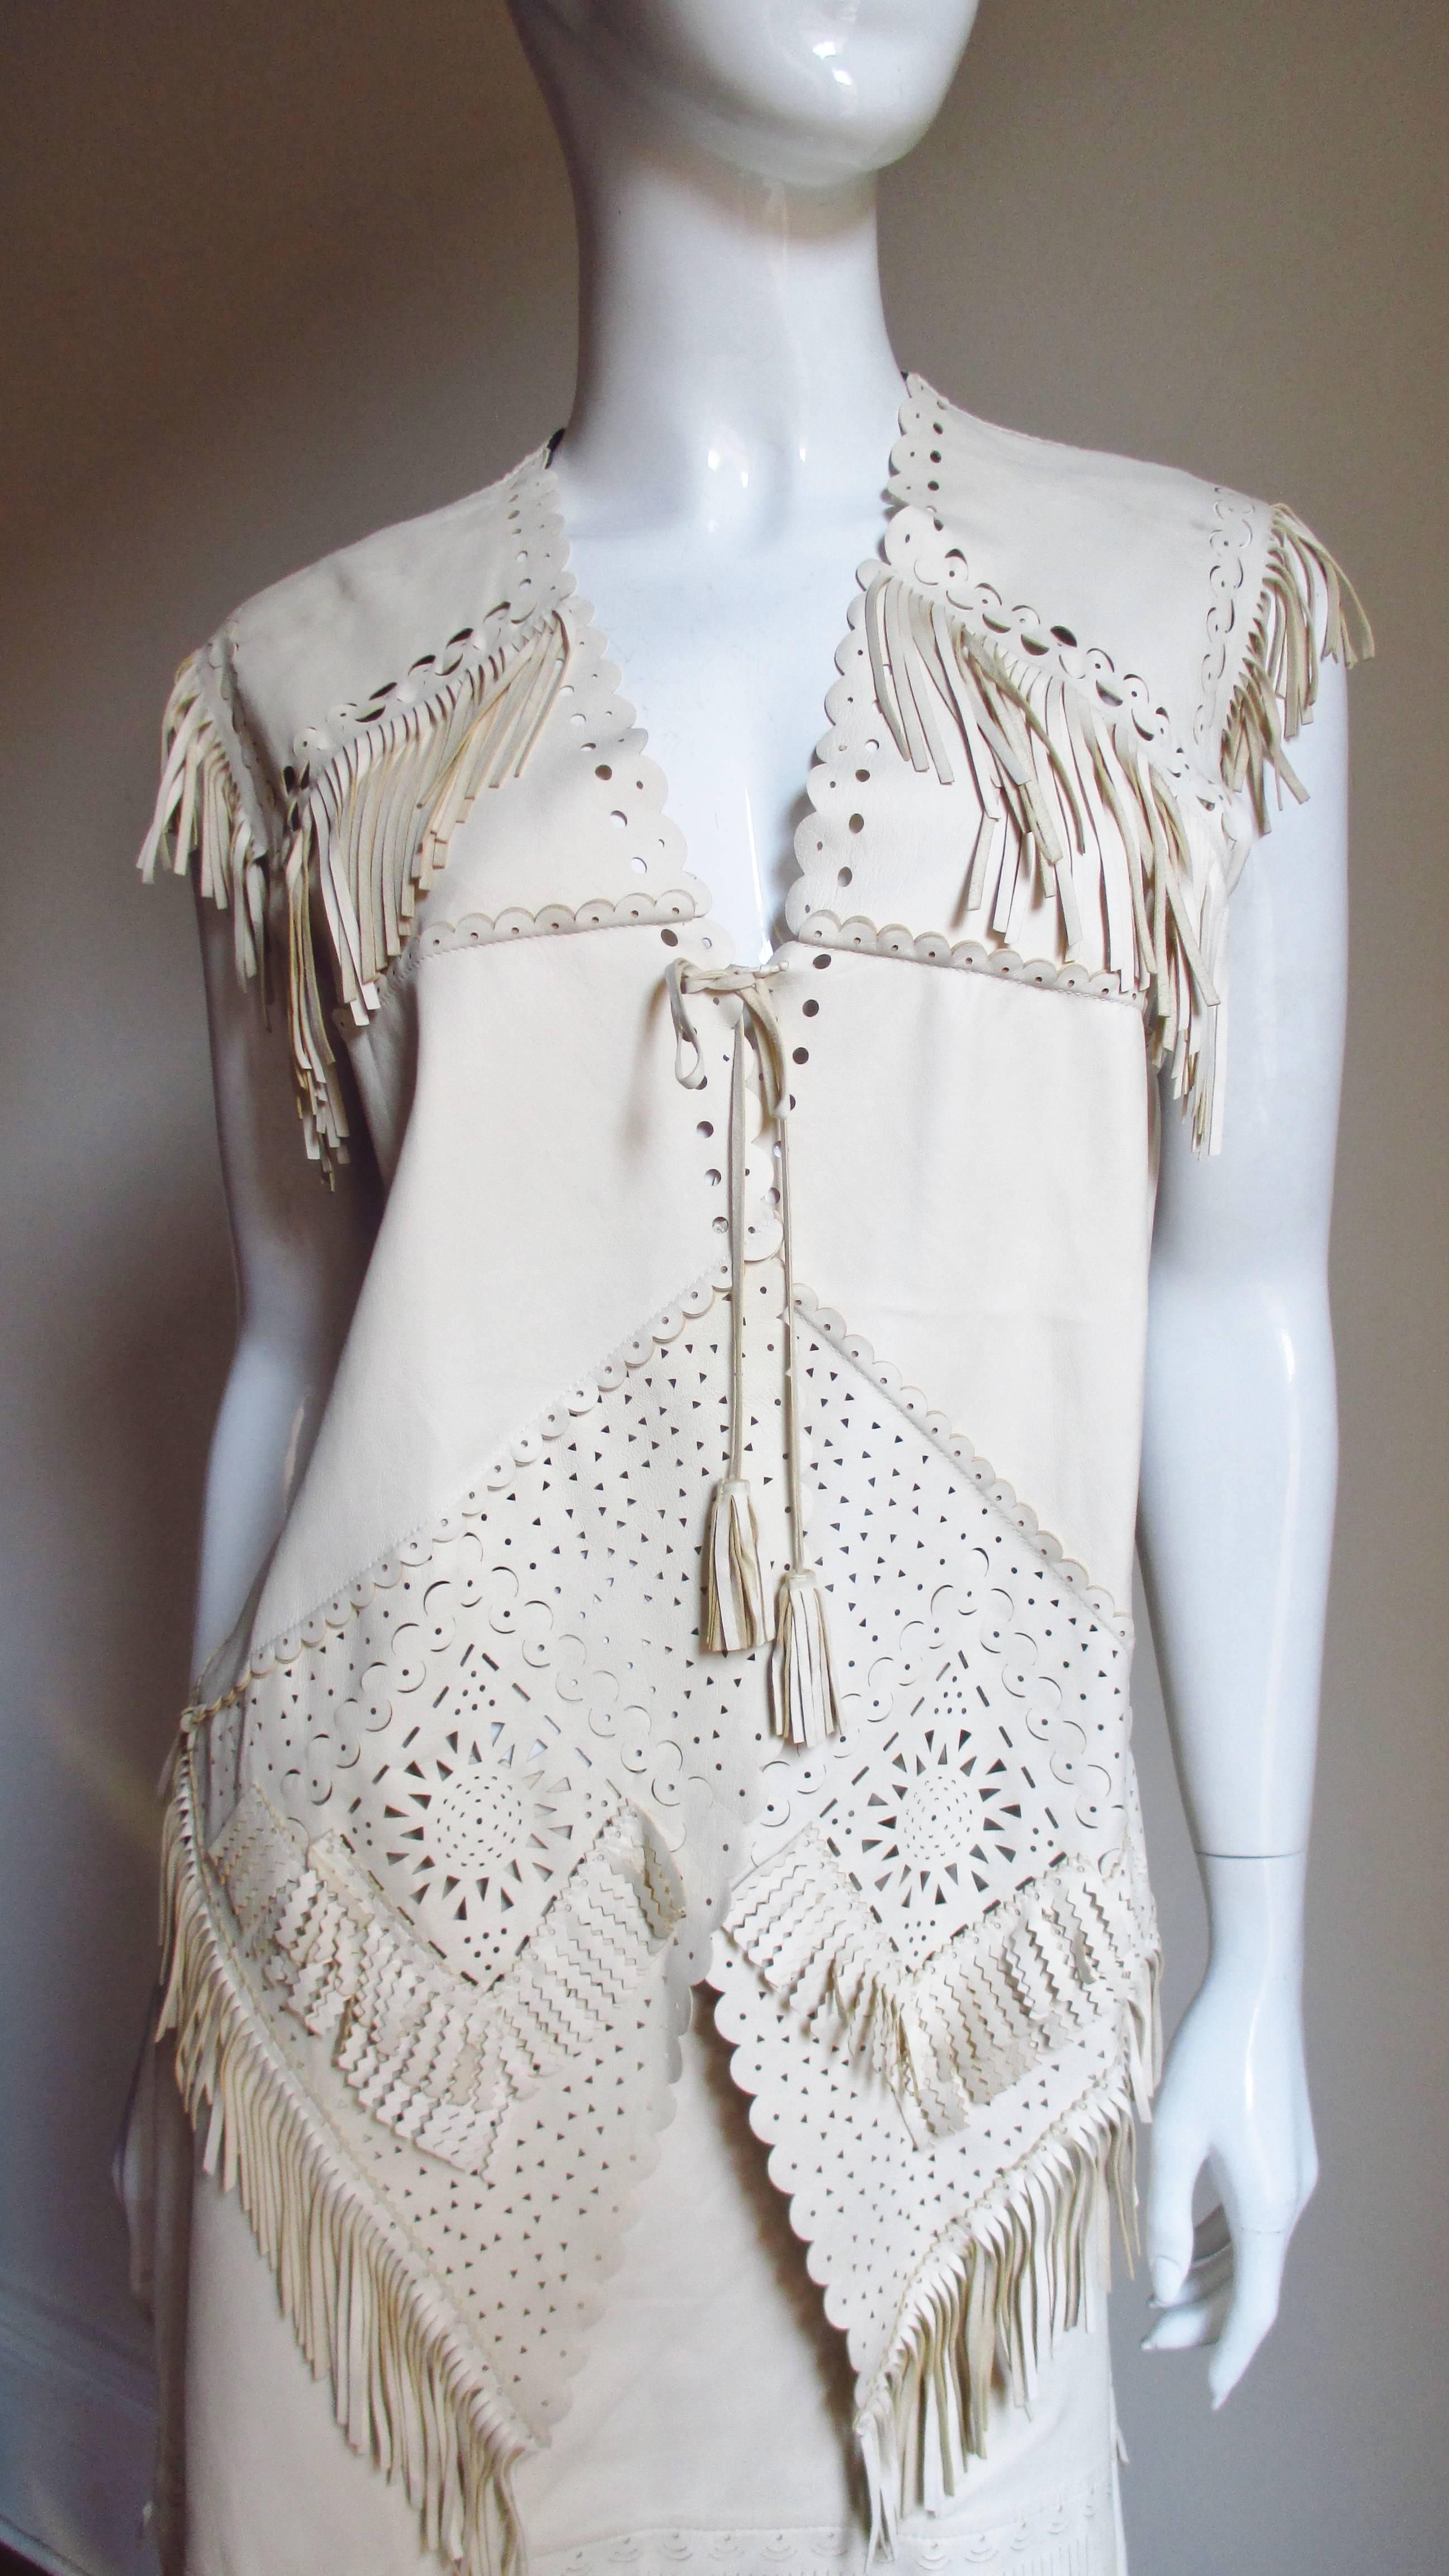 A stunning skirt and vest, jacket set from Jean Paul Gaultier in fine, soft, supple off white leather. It consist of a vest/top/jacket laser cut in elaborate shapes, patterns and appliqued with varying lengths of fringe on the front, armholes and